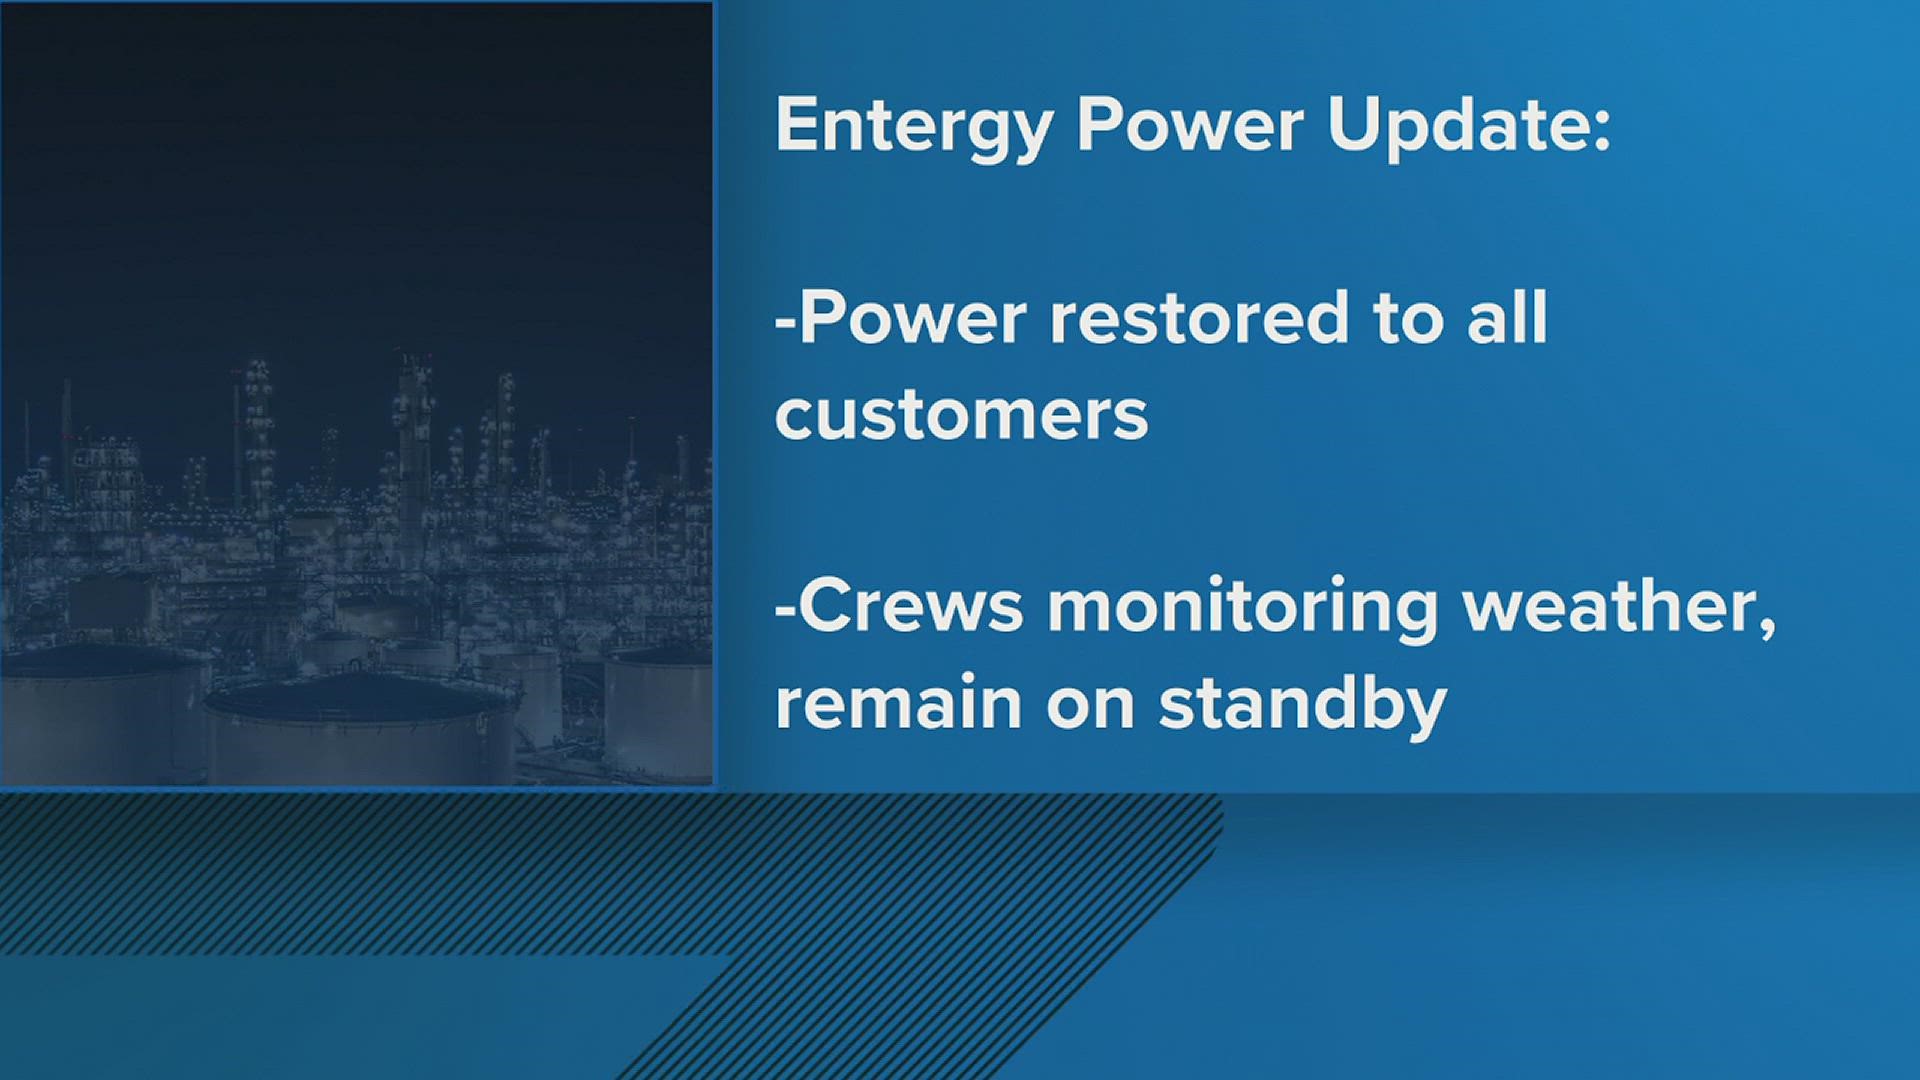 Entergy Texas crews have restored power to all customers who were affected by recent outages.